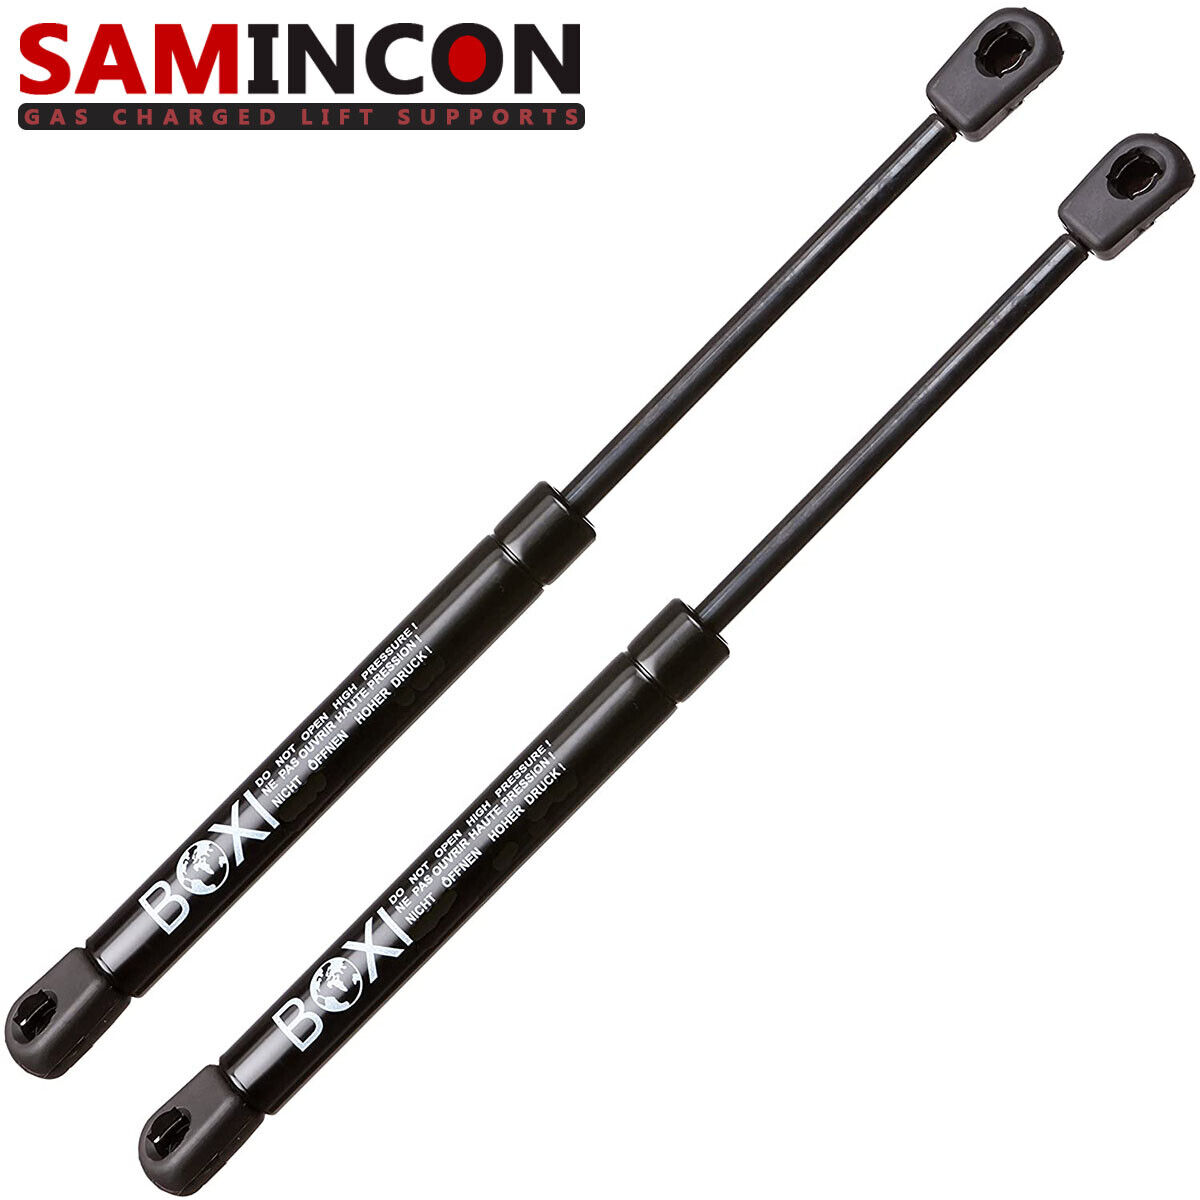 2X Liftgate Lift Supports Struts Shocks Gas Springs Dampers For American Motors